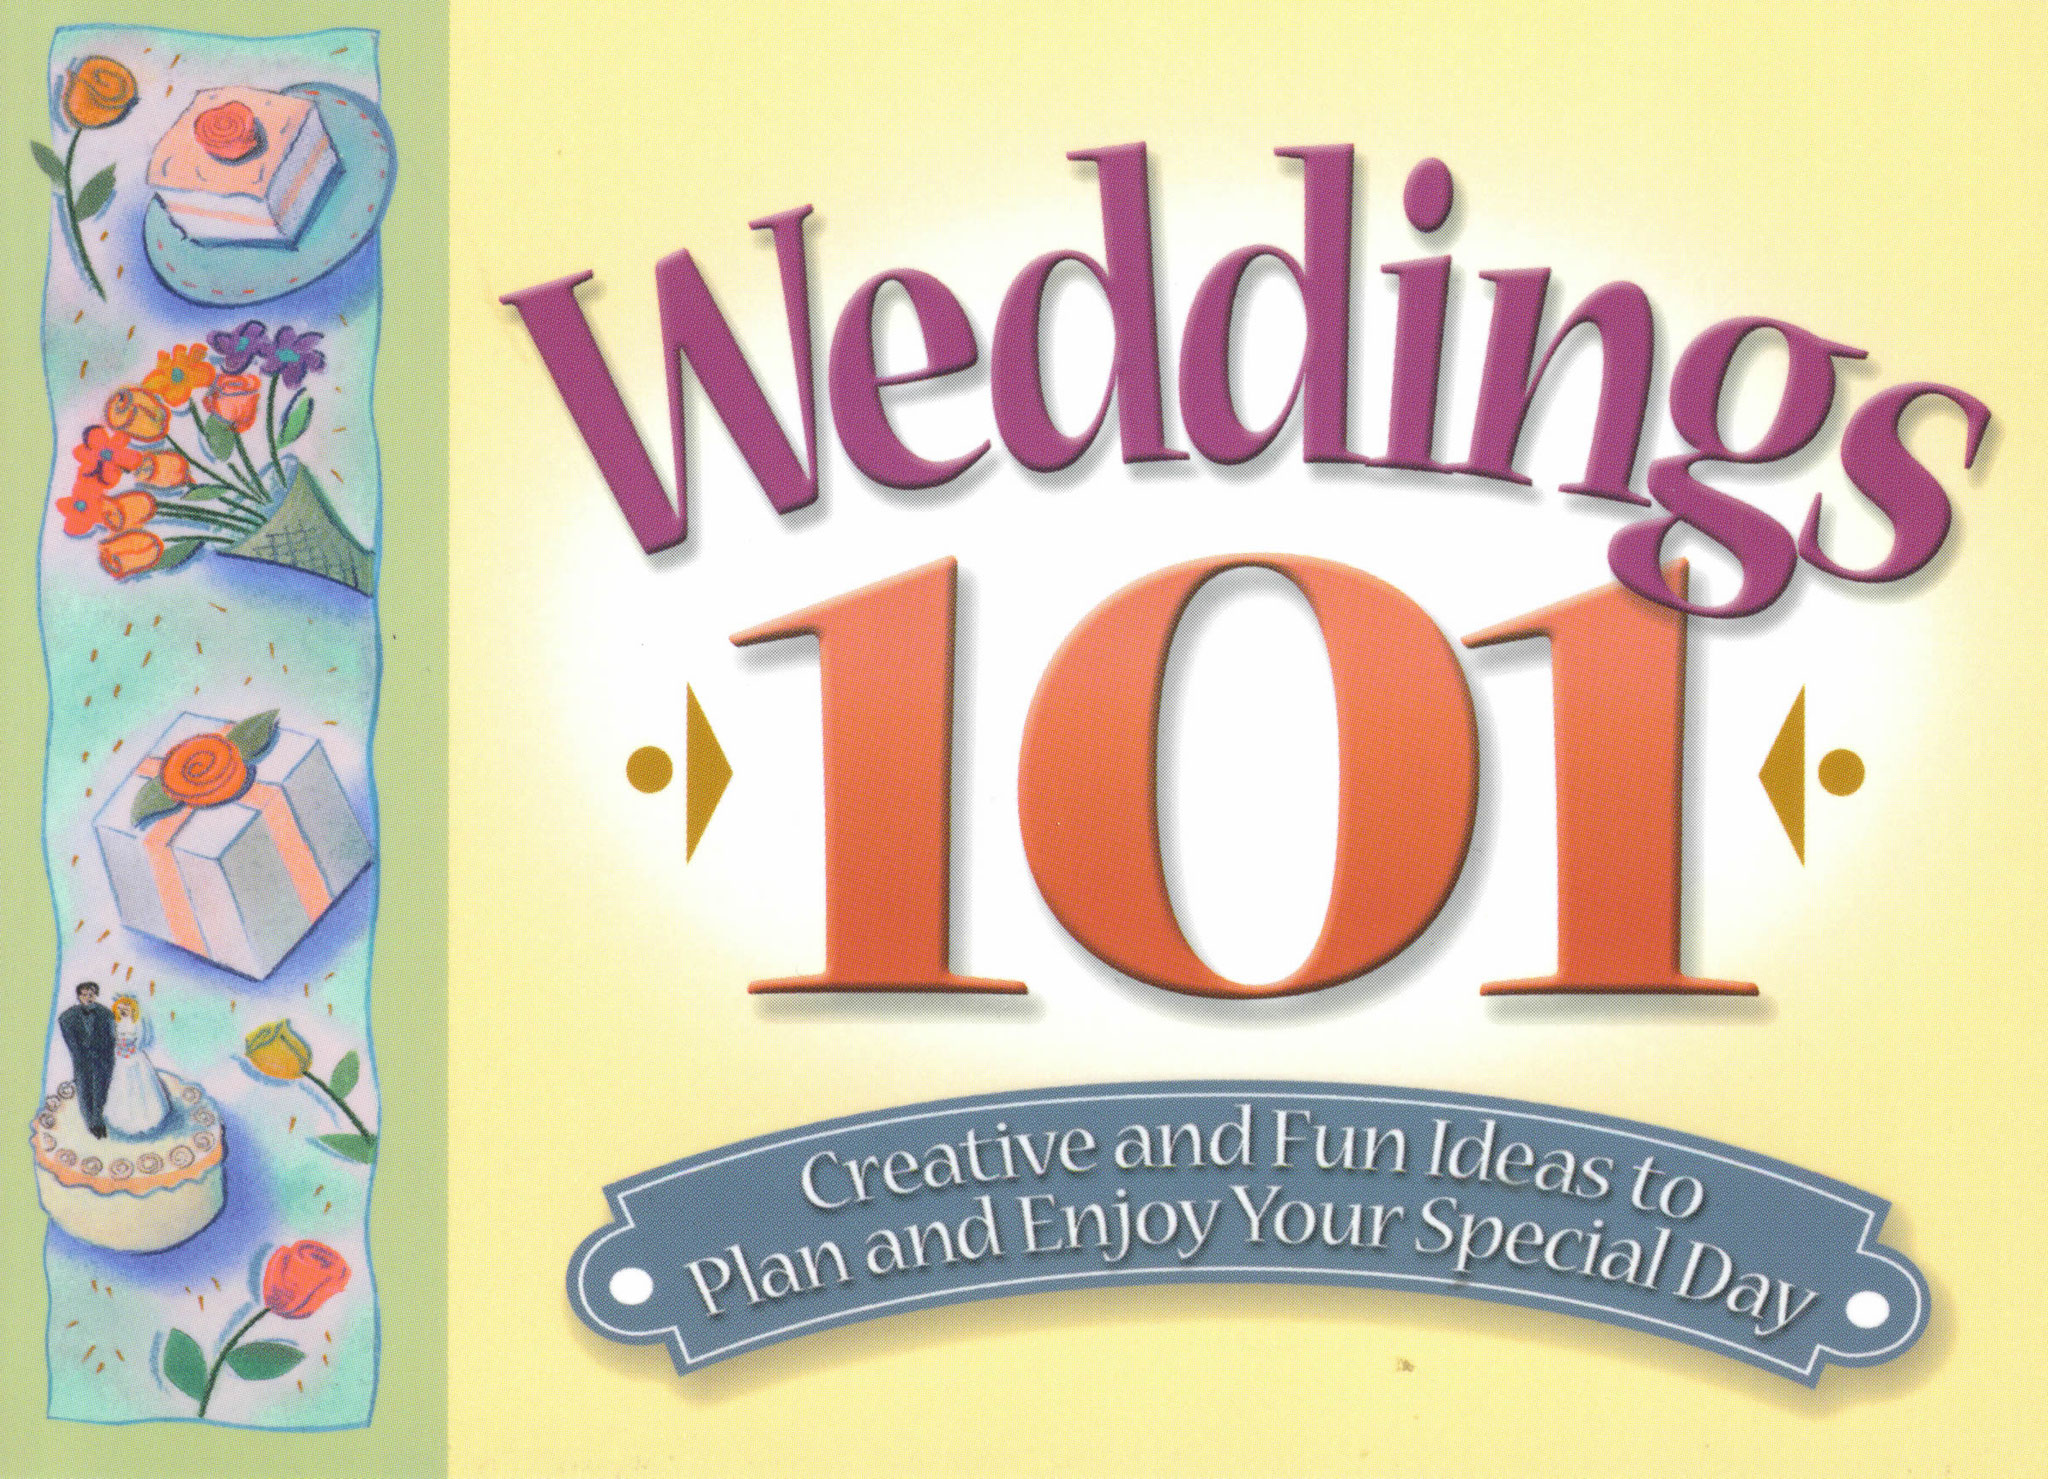 An inspirational wedding planner/gift book co-authored by Debbie Wong